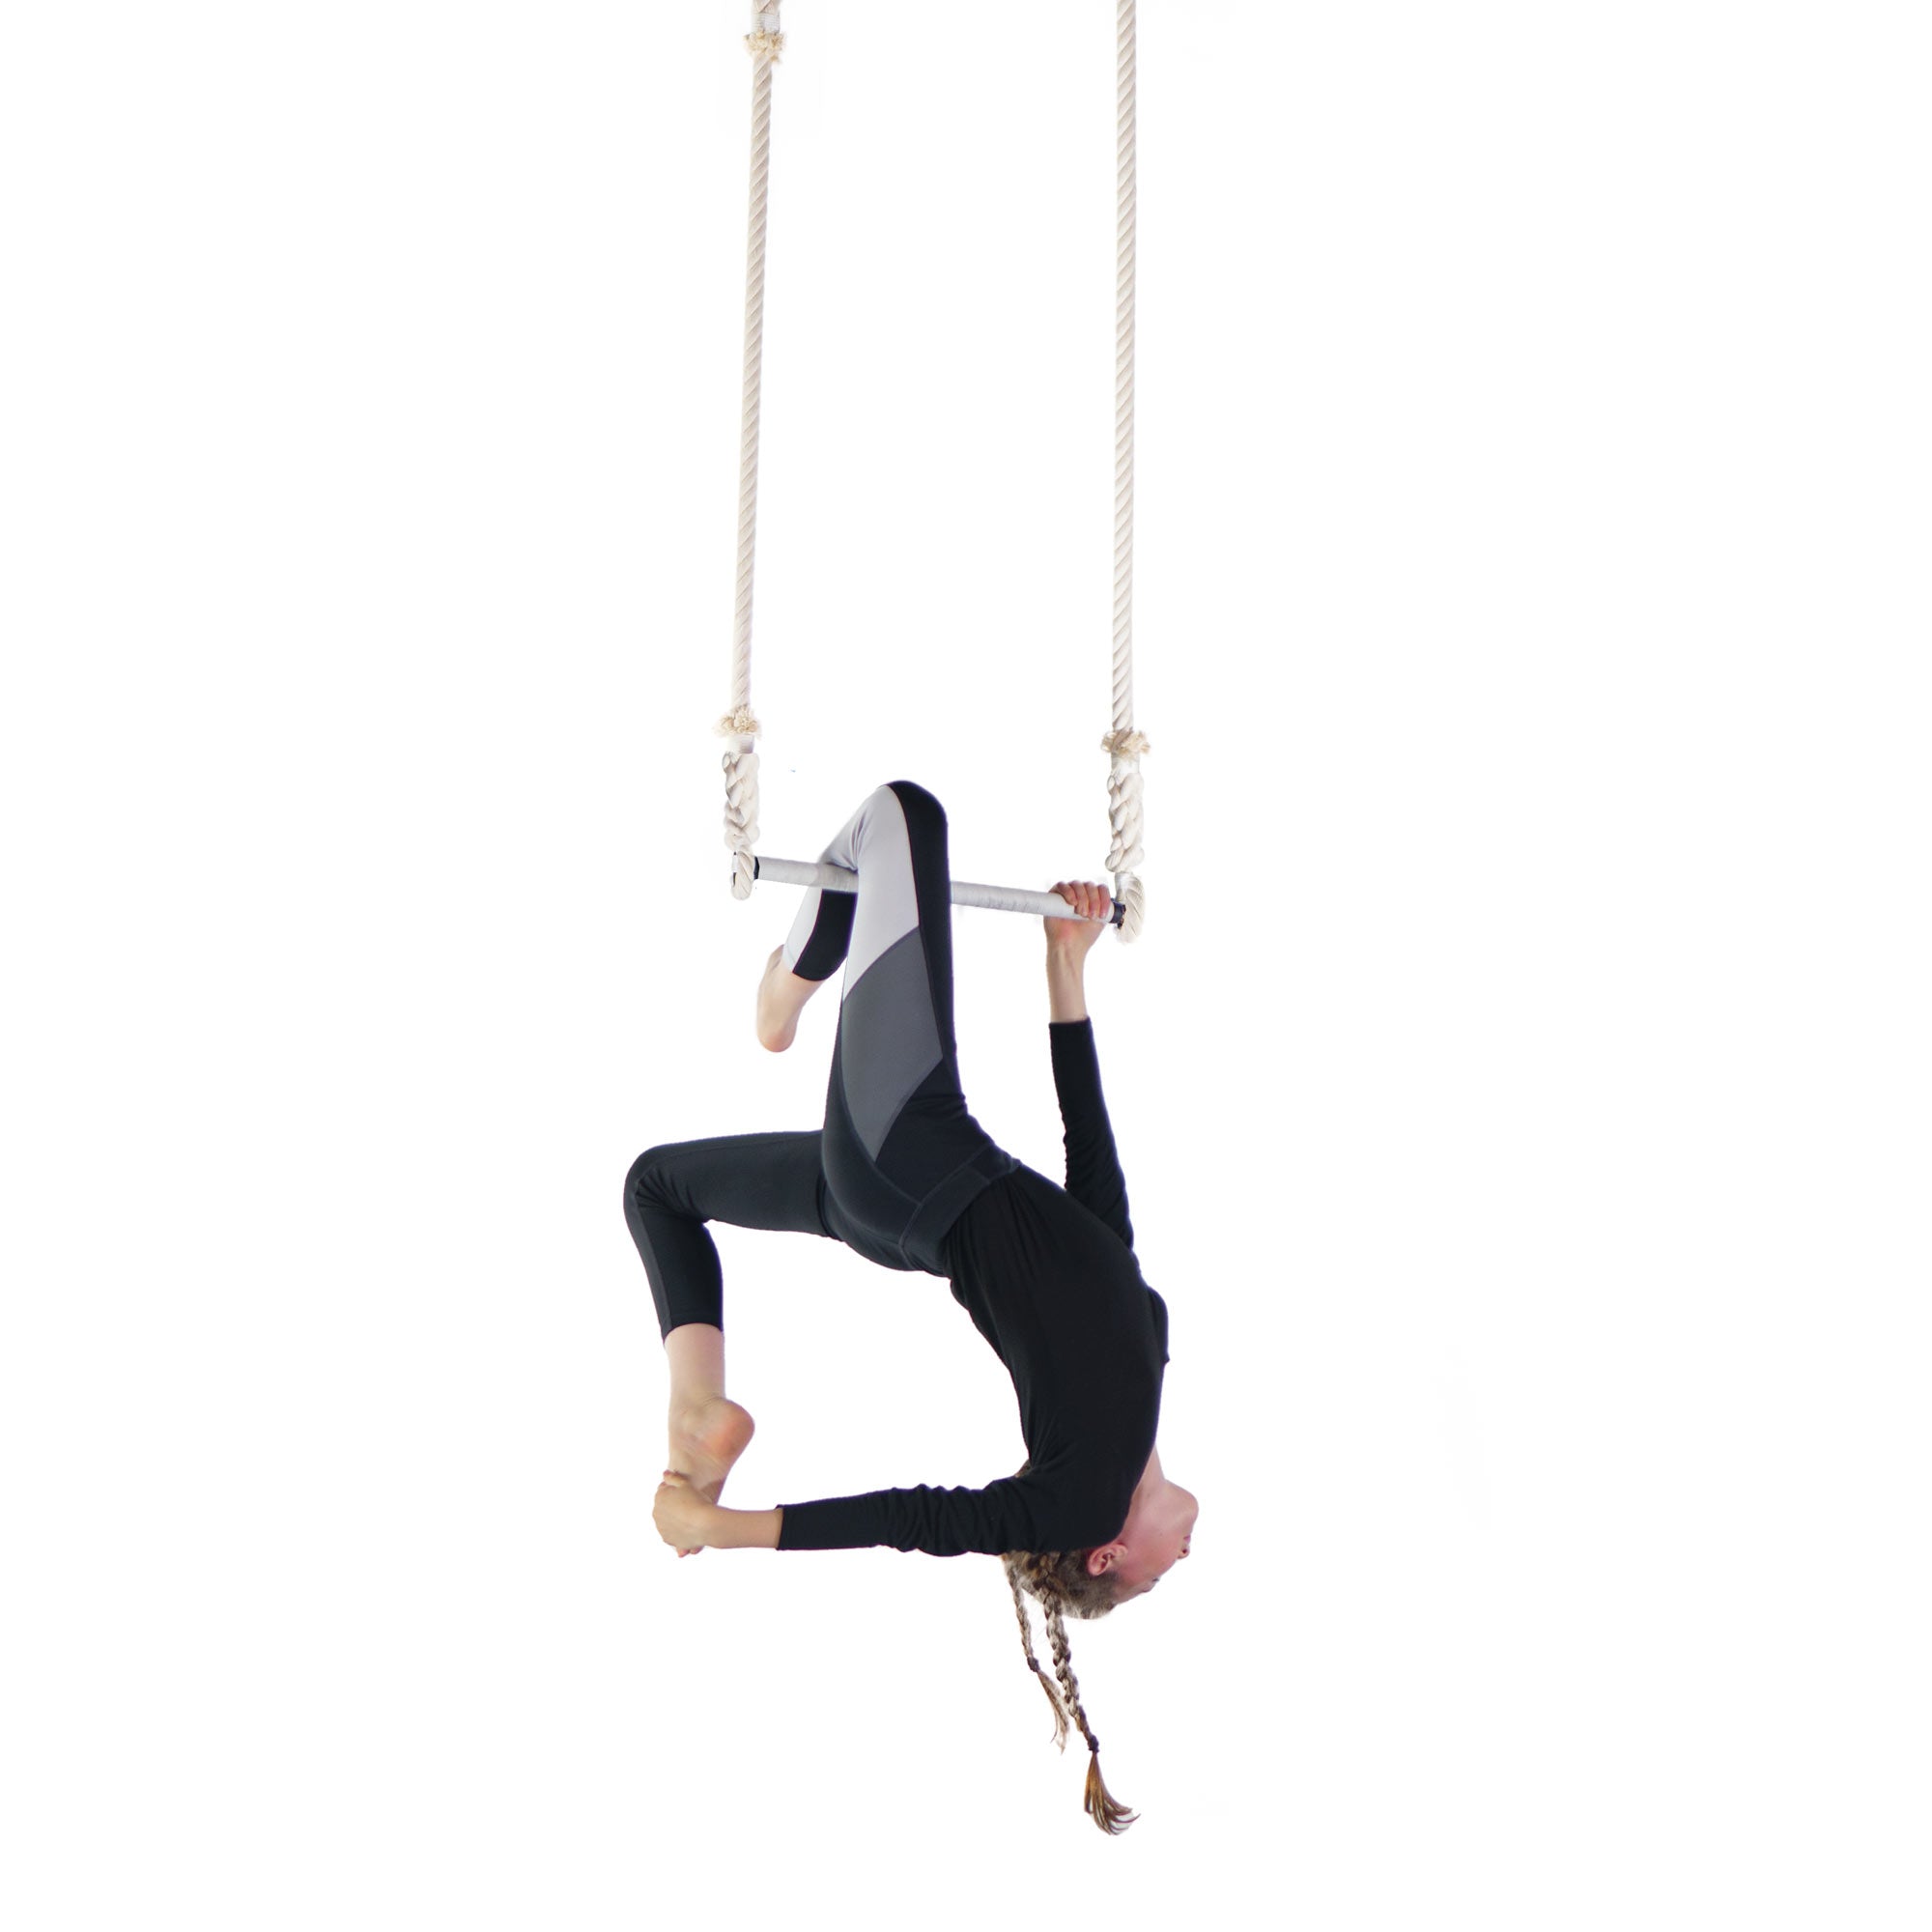 performer on youth trapeze